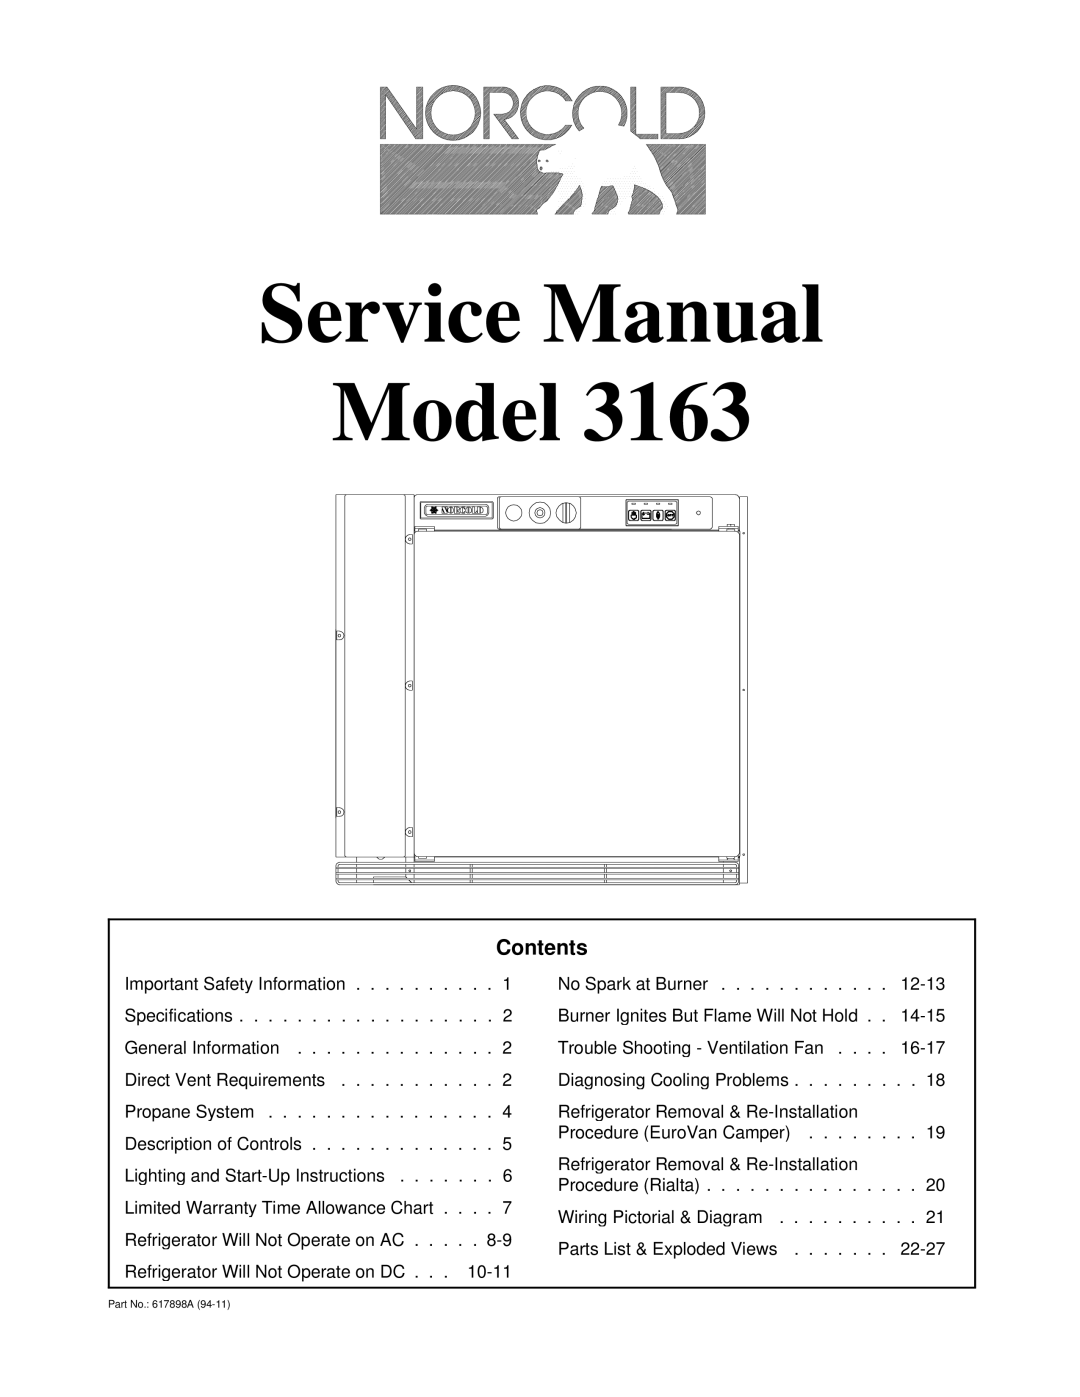 Bryant 3163 service manual Contents 